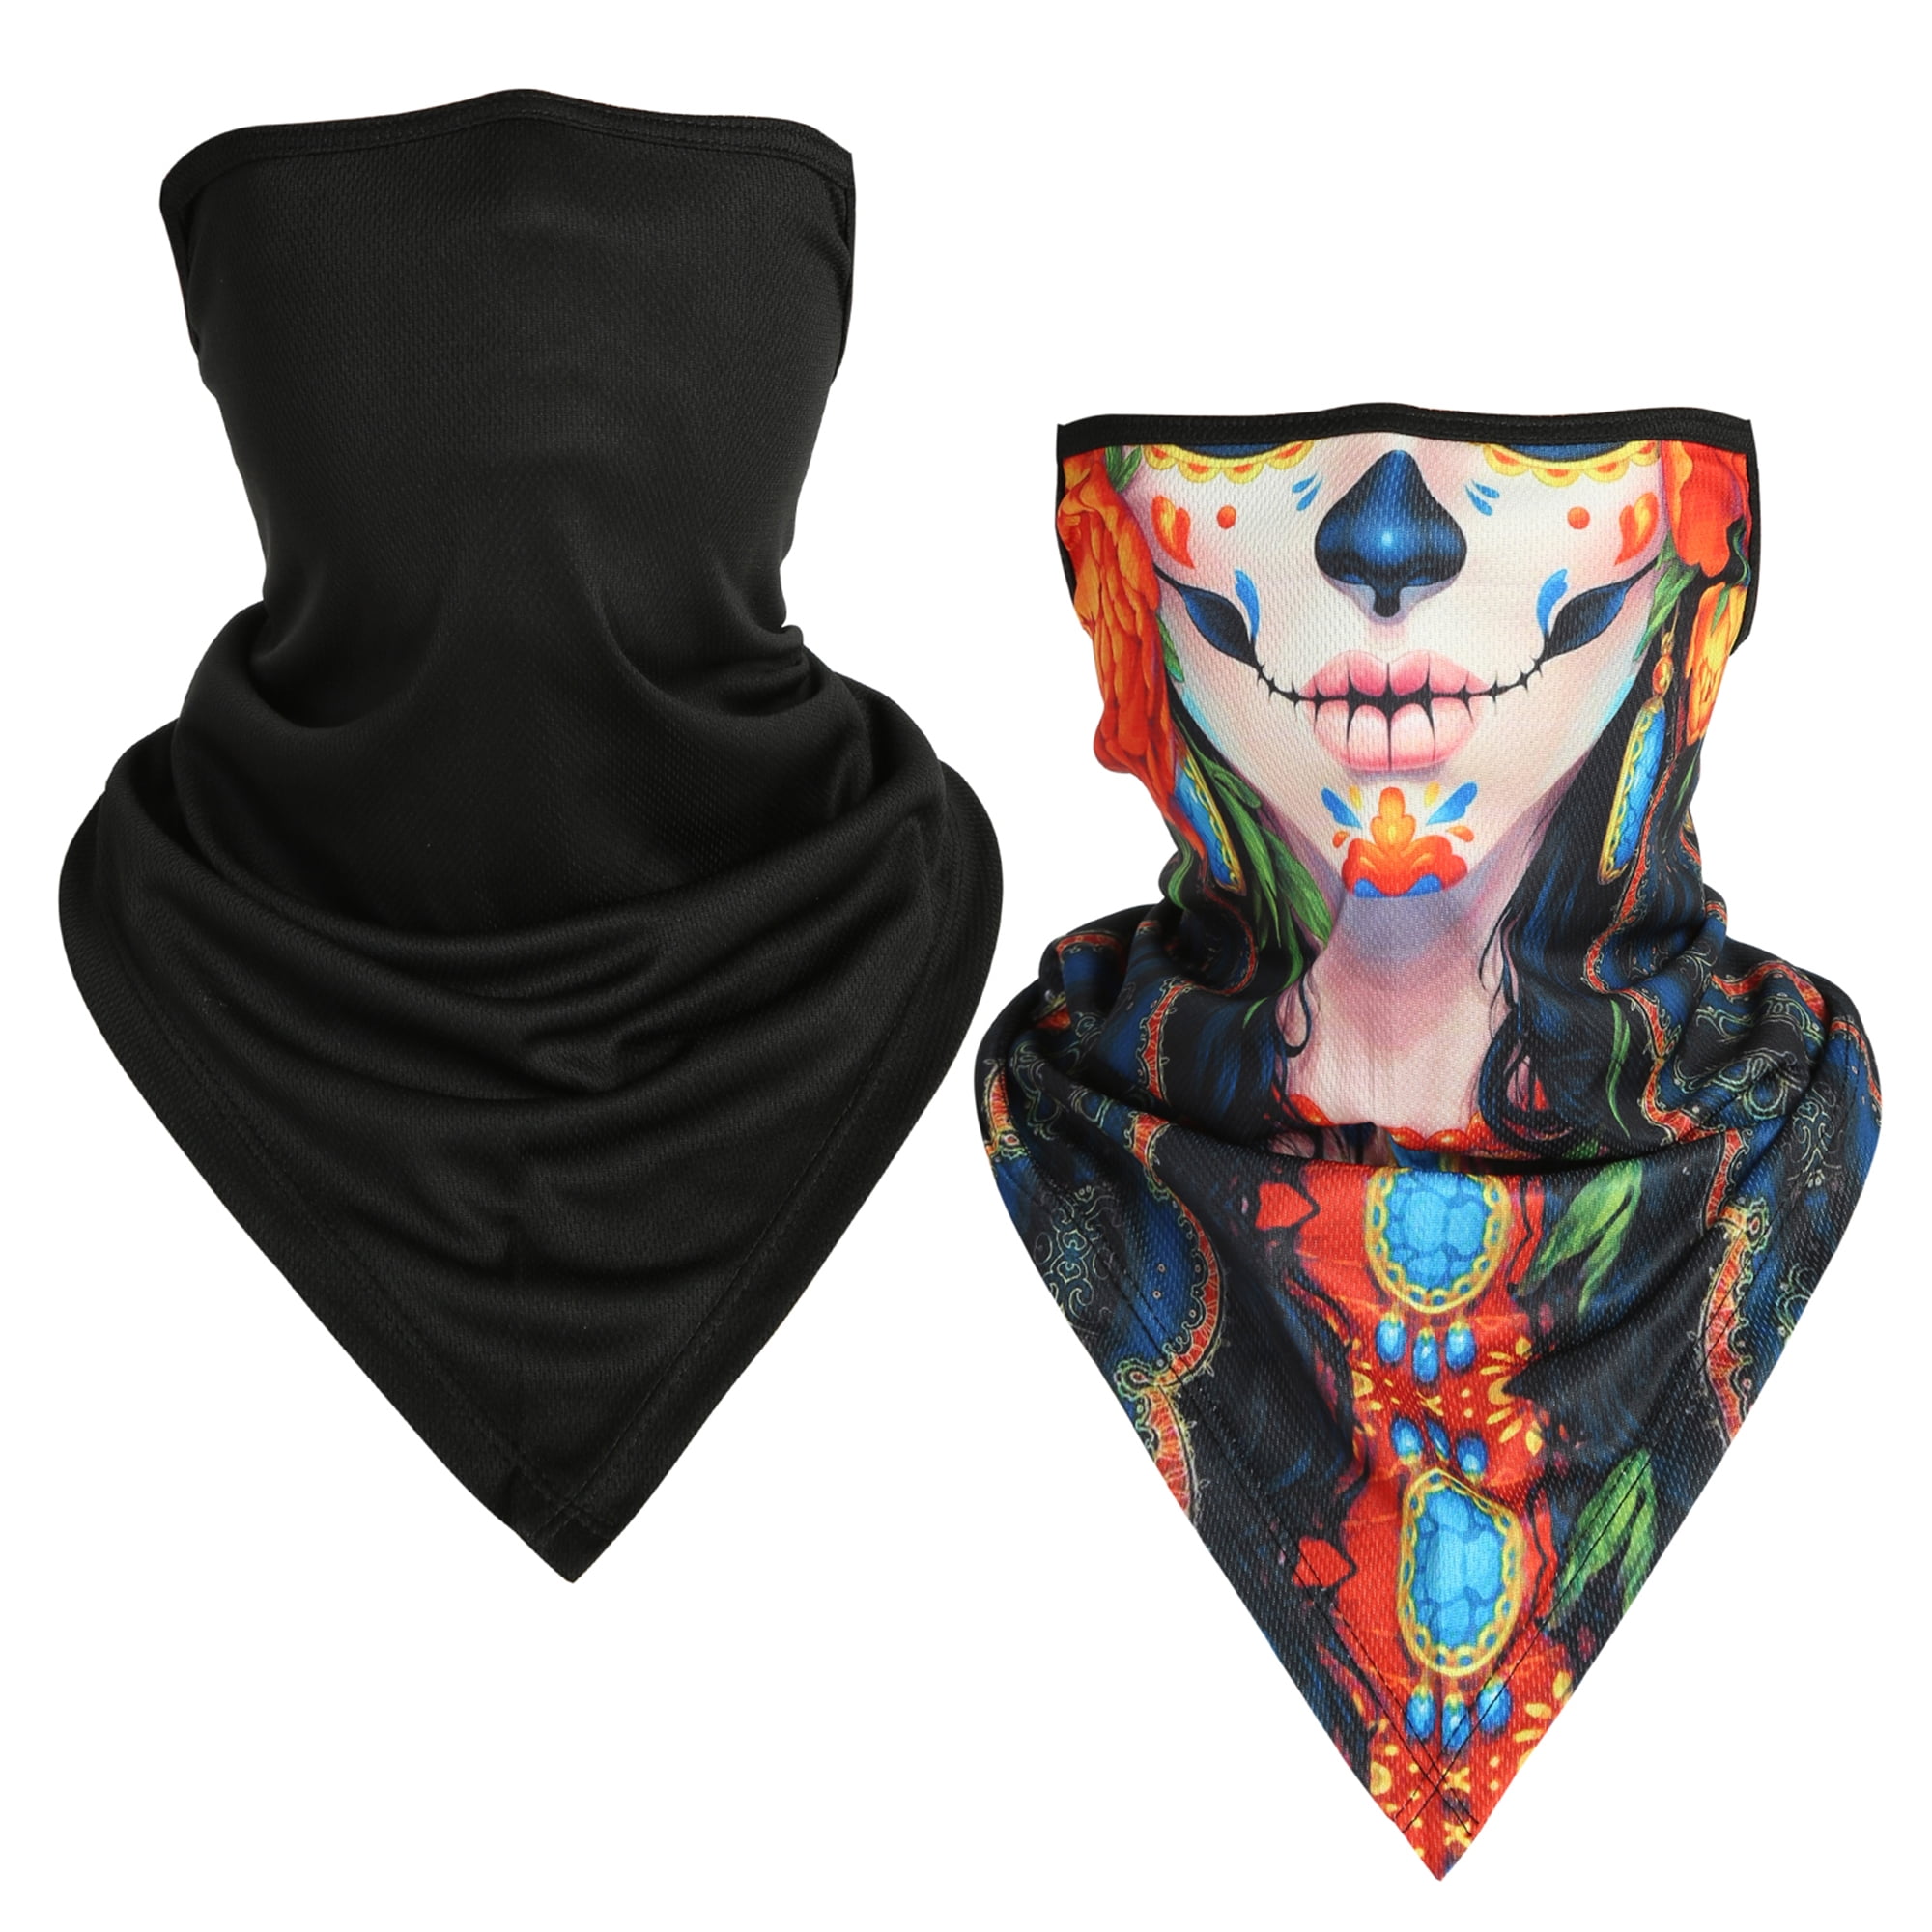 Details about   Ear Hangers Neck Gaiter UV Protection Face Mask Scarf Windproof Bandana Headwear 